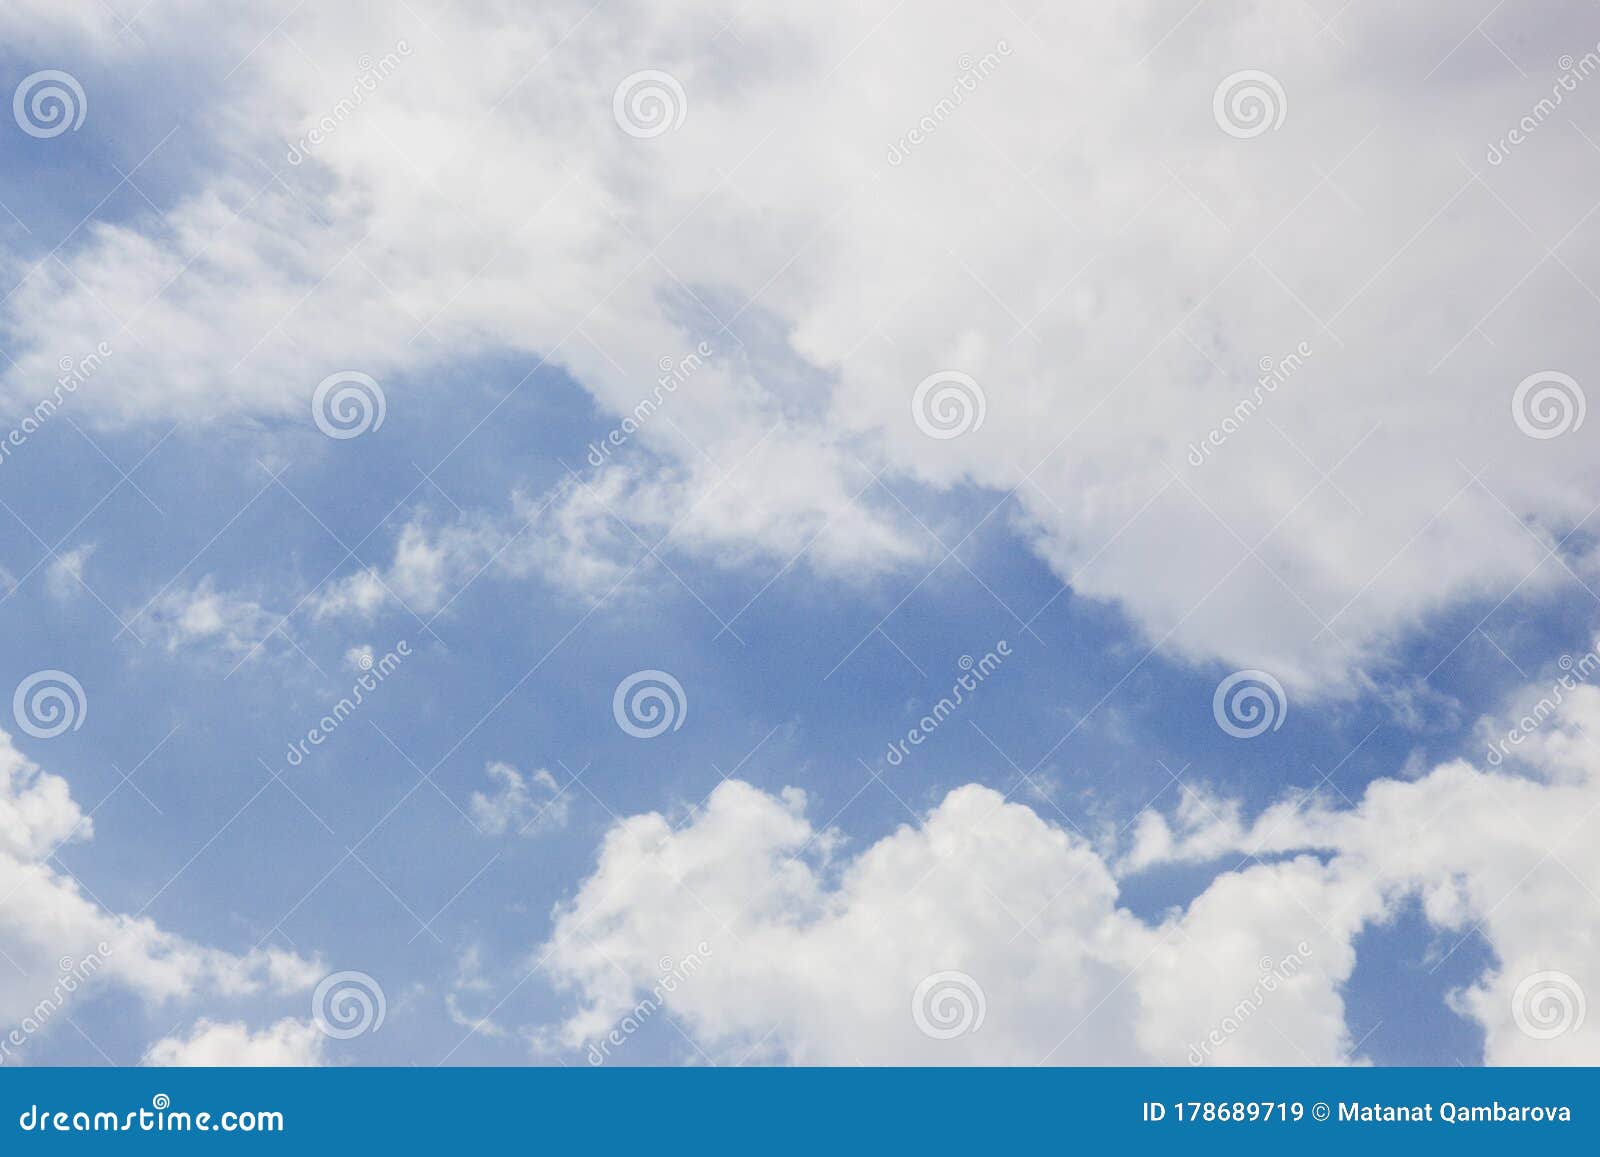 White Cloud Background And Texture Stock Image Image Of Background Cloud